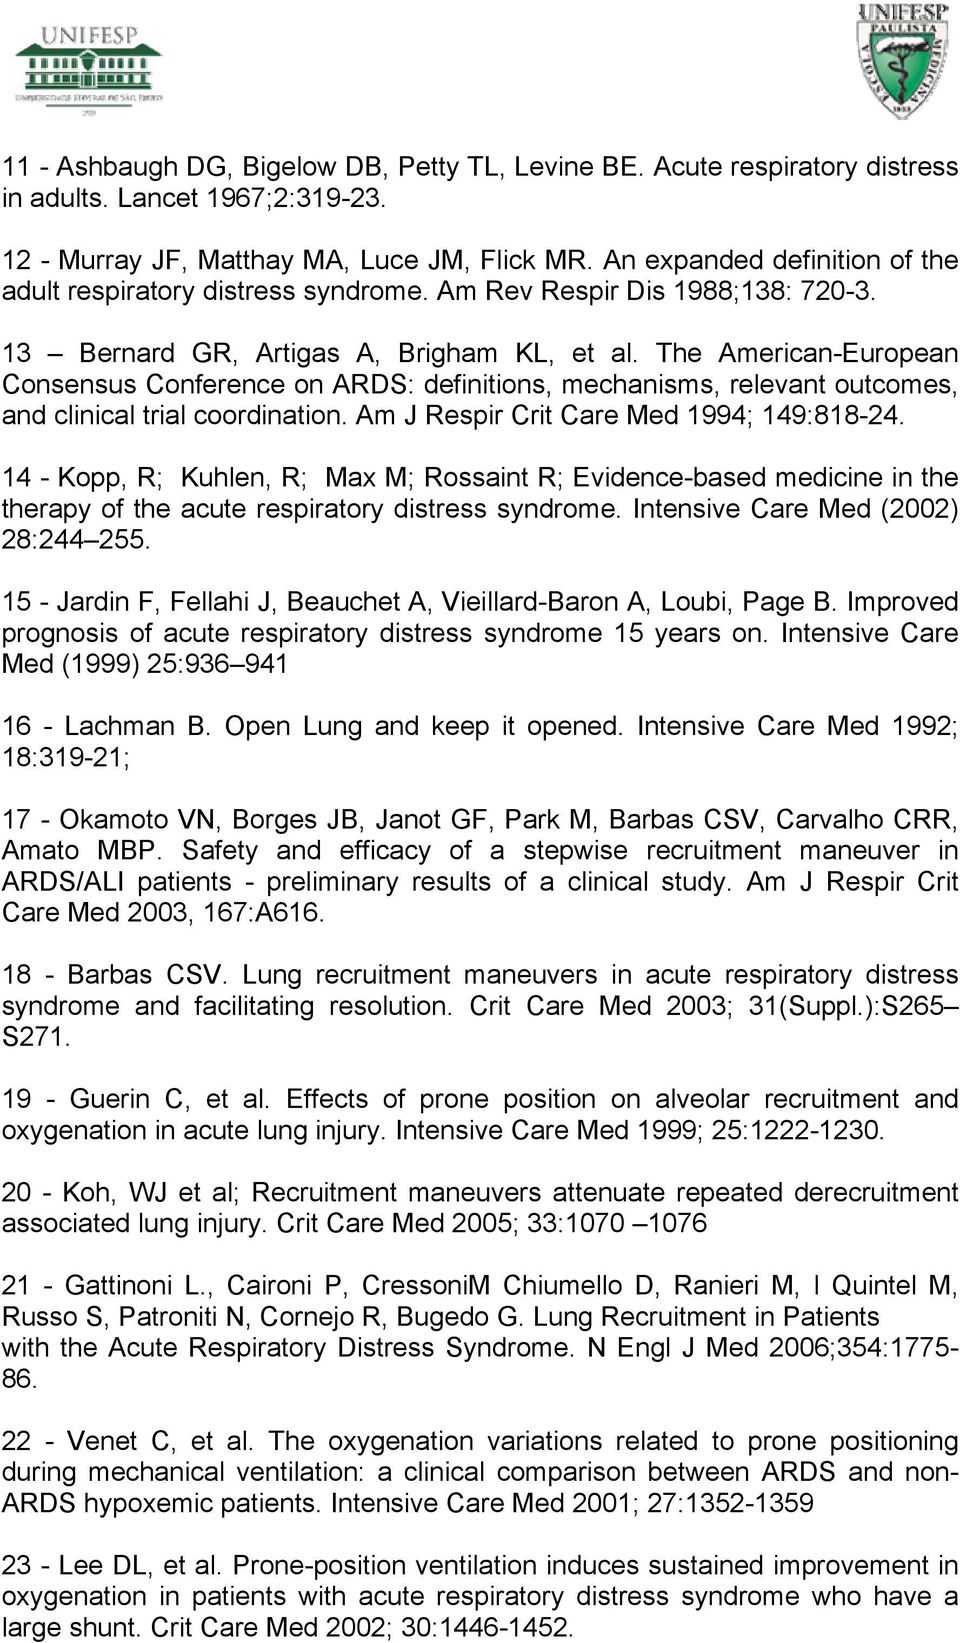 The American-European Consensus Conference on ARDS: definitions, mechanisms, relevant outcomes, and clinical trial coordination. Am J Respir Crit Care Med 1994; 149:818-24.